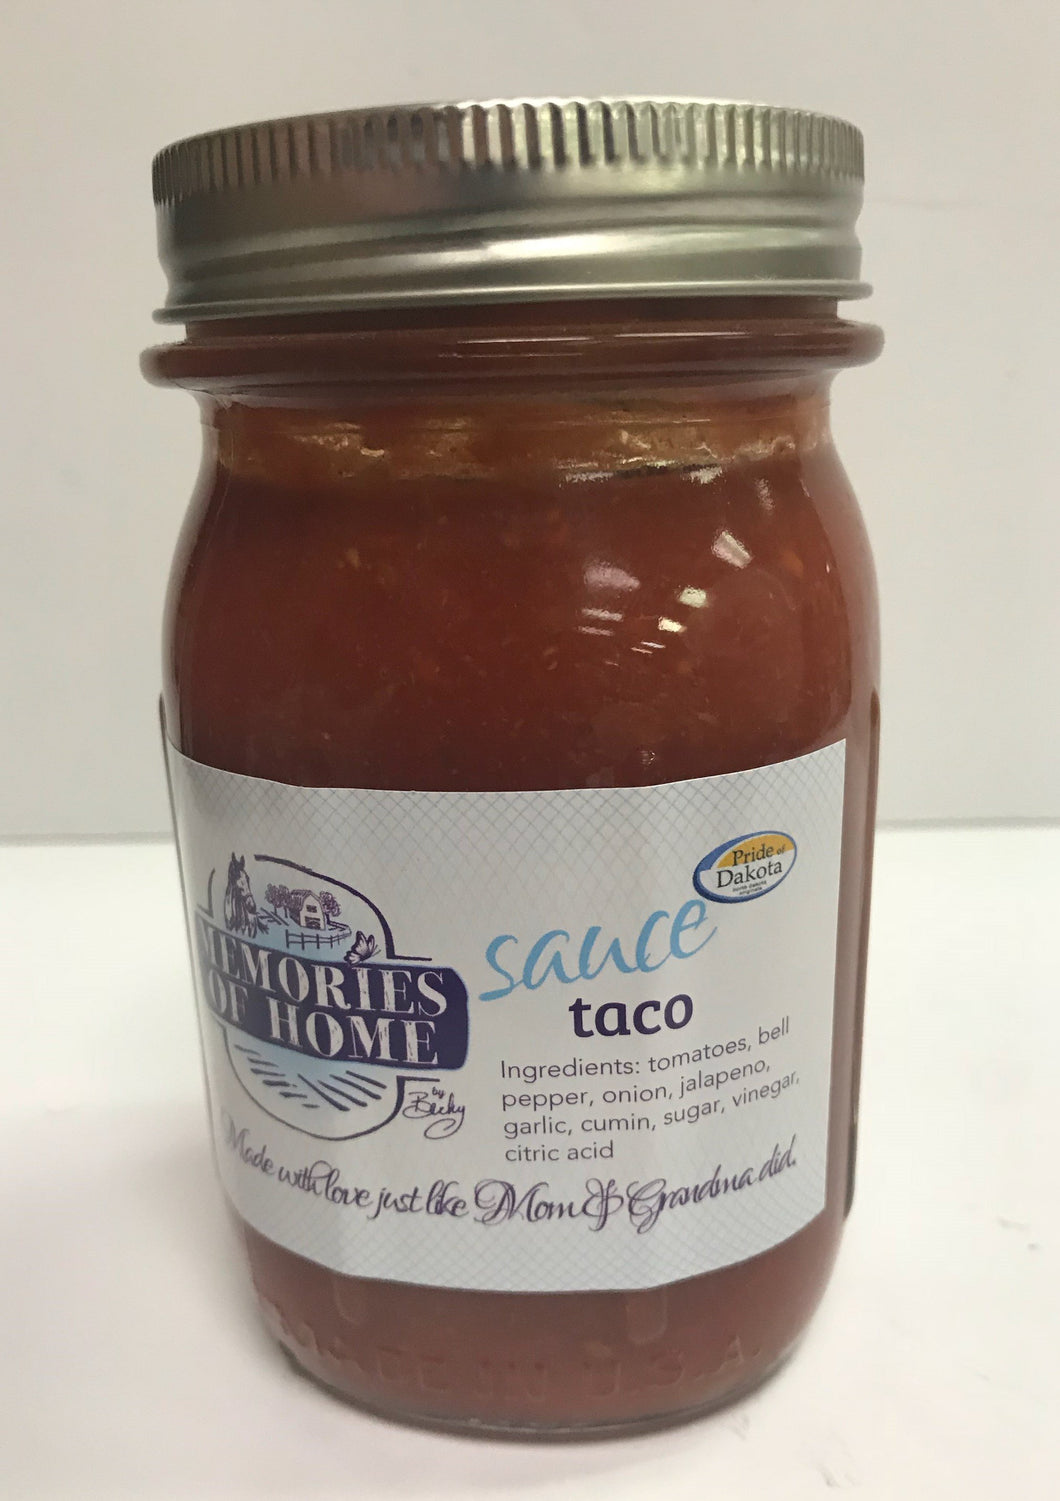 Taco Sauce from Memories of Home